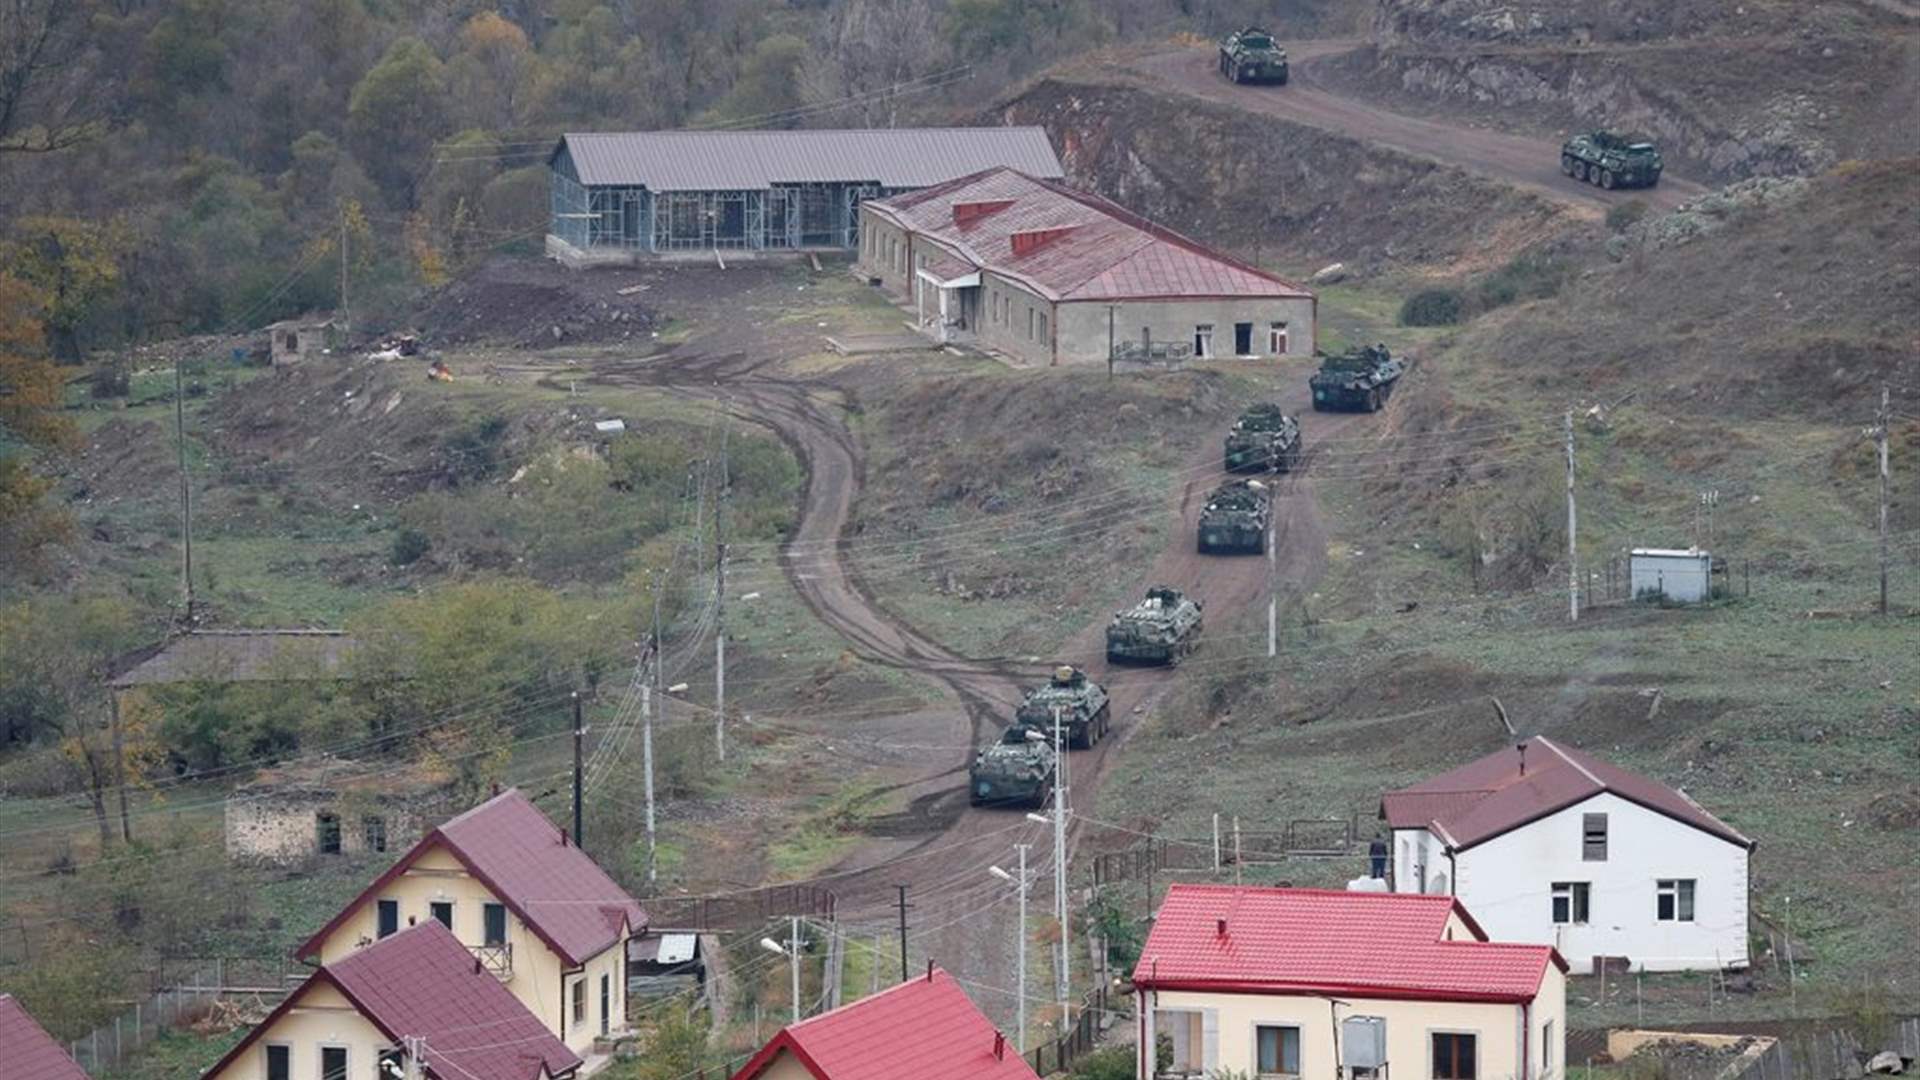 The European Parliament accuses Azerbaijan of &quot;ethnic cleansing&quot; in Nagorno-Karabakh